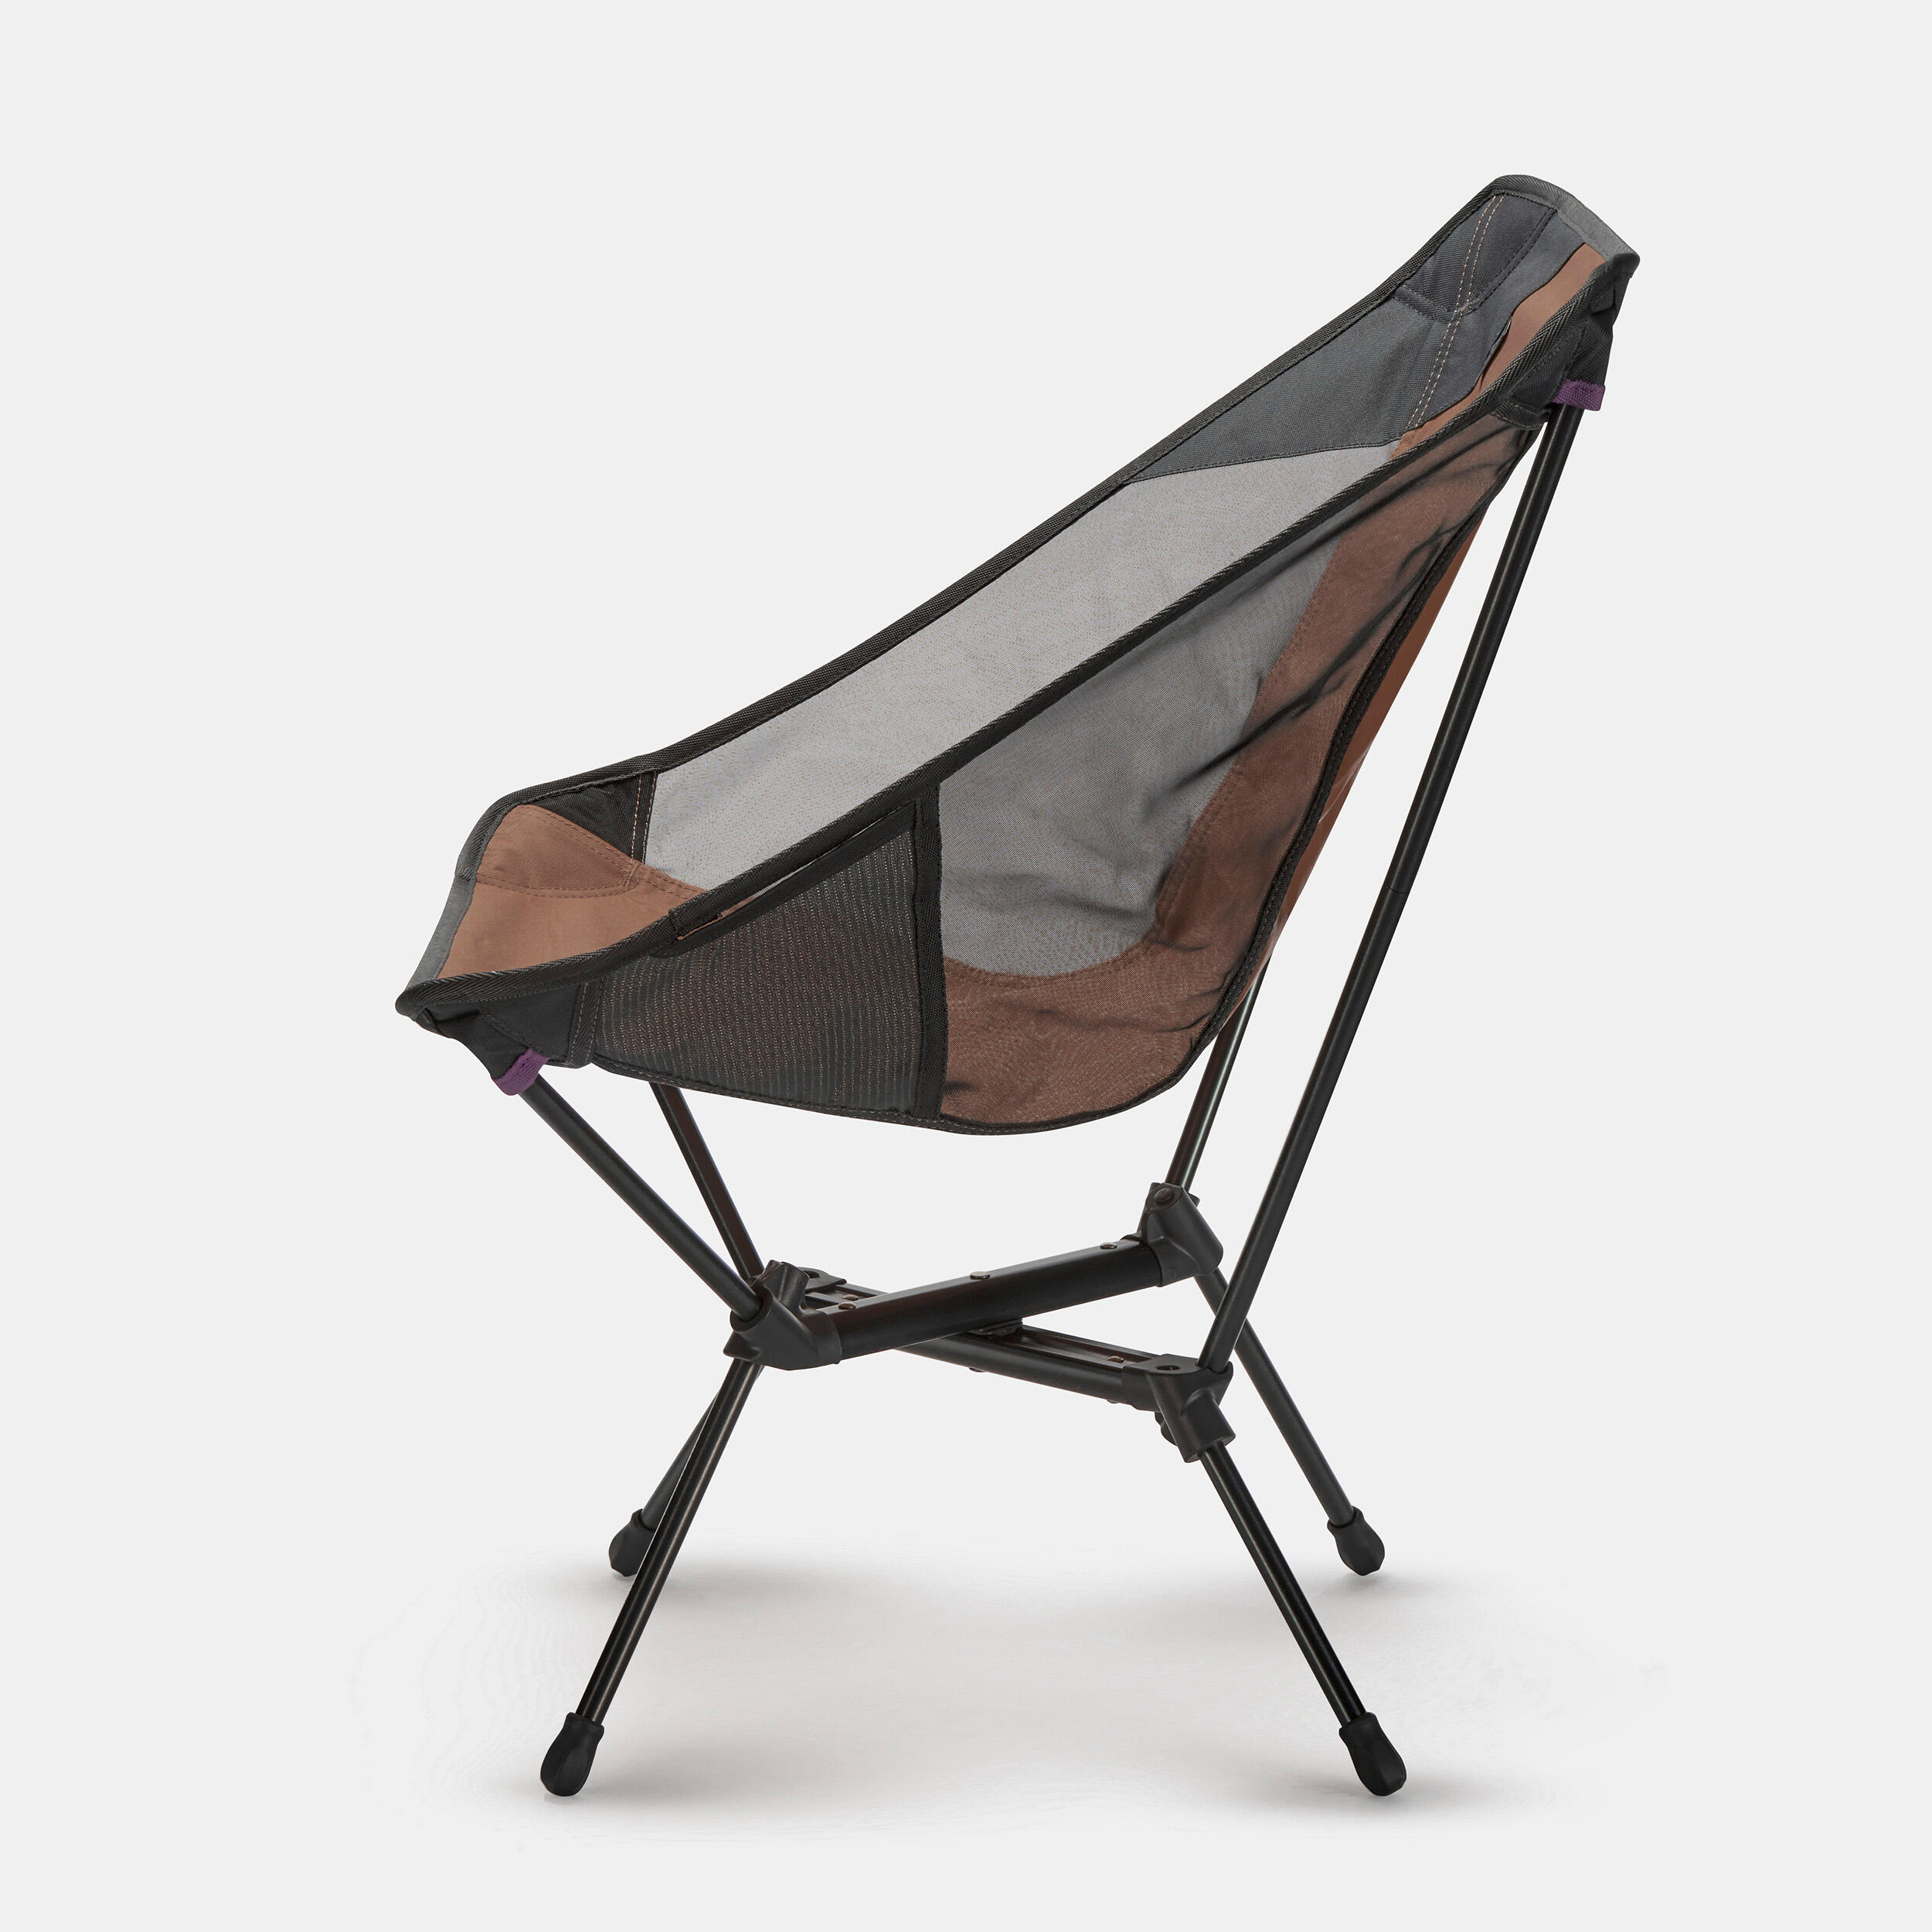 LOW FOLDING CAMPING CHAIR MH500 - BROWN 7/10